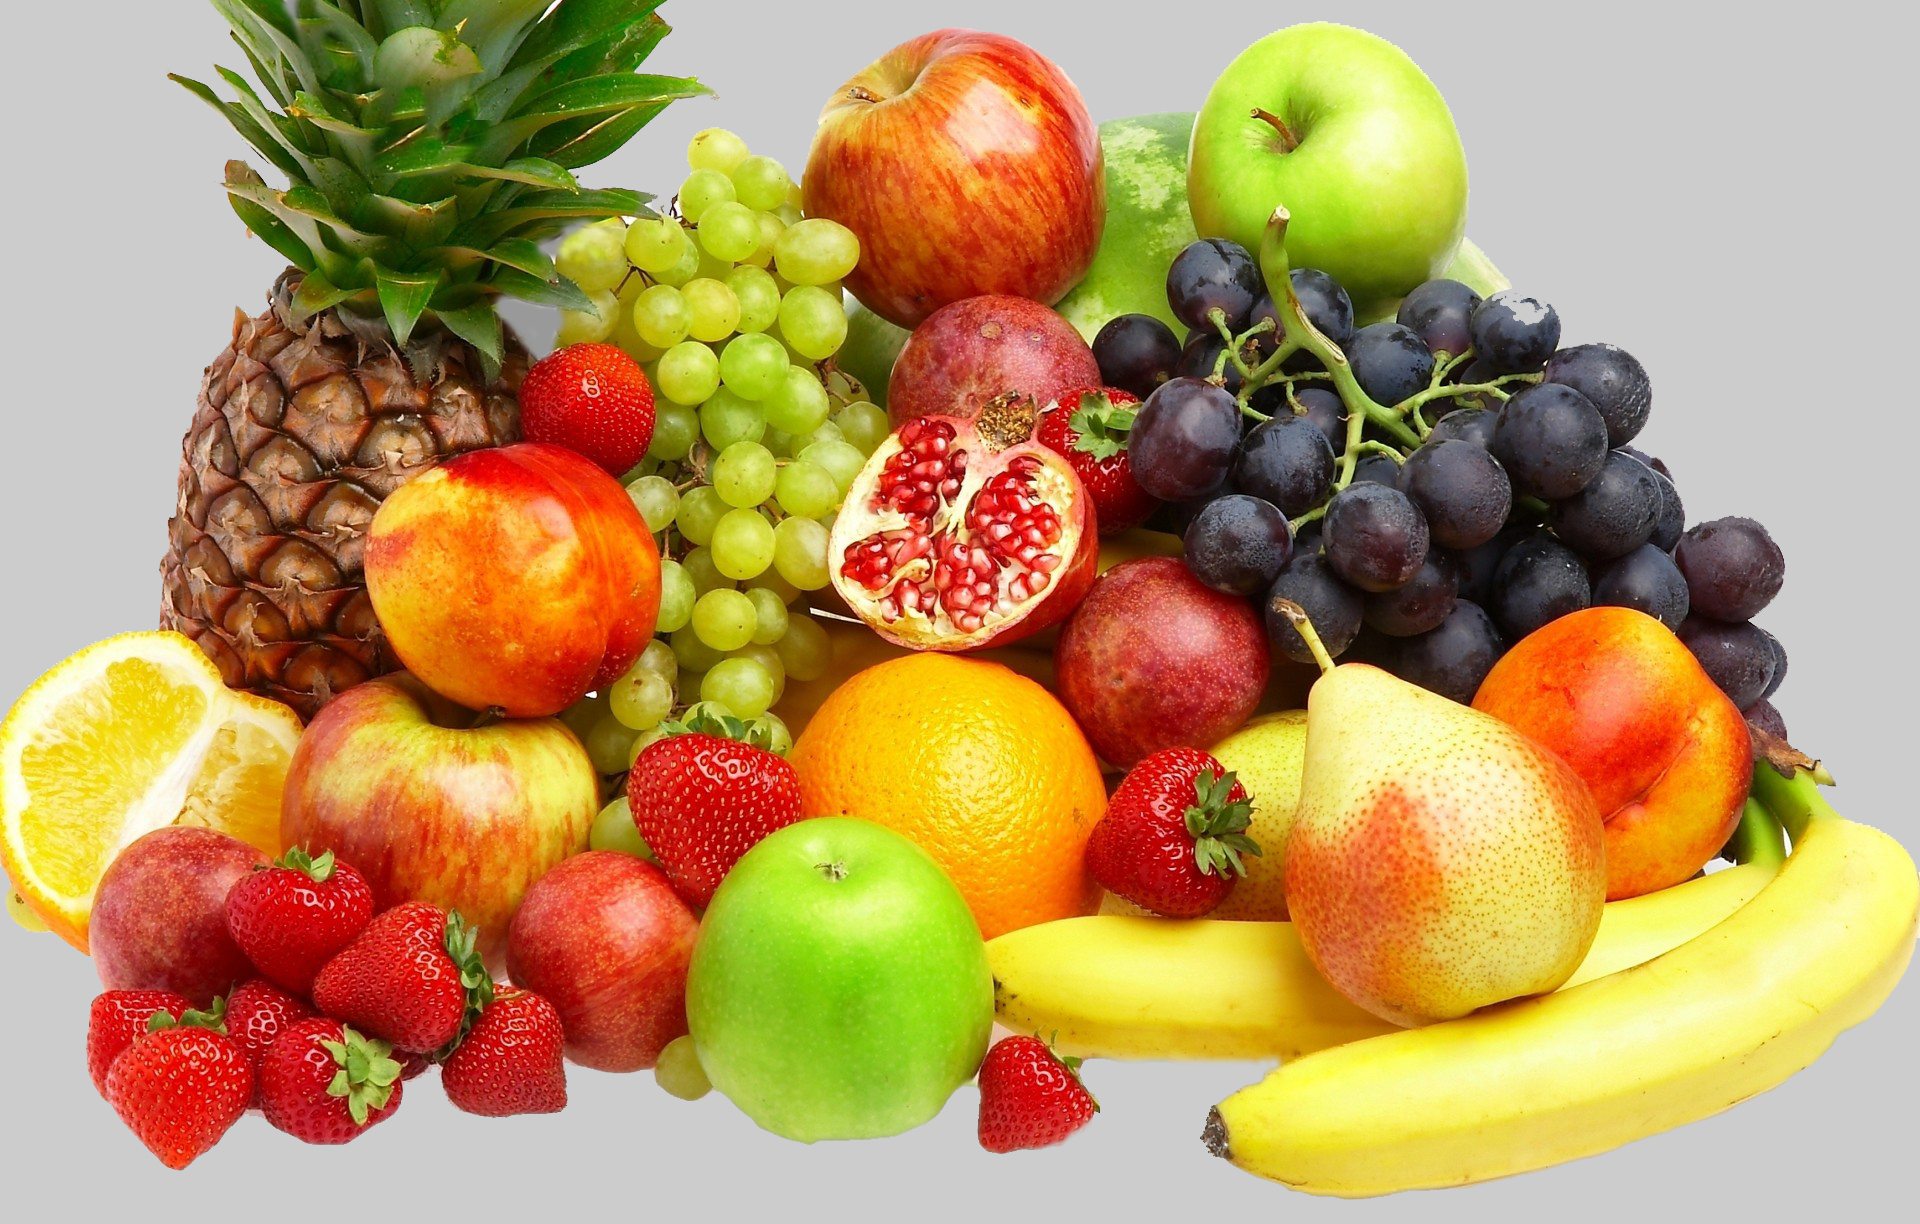  10 kinds of fruits work well for people with weight gain, are want to lose weight safely and effectively.